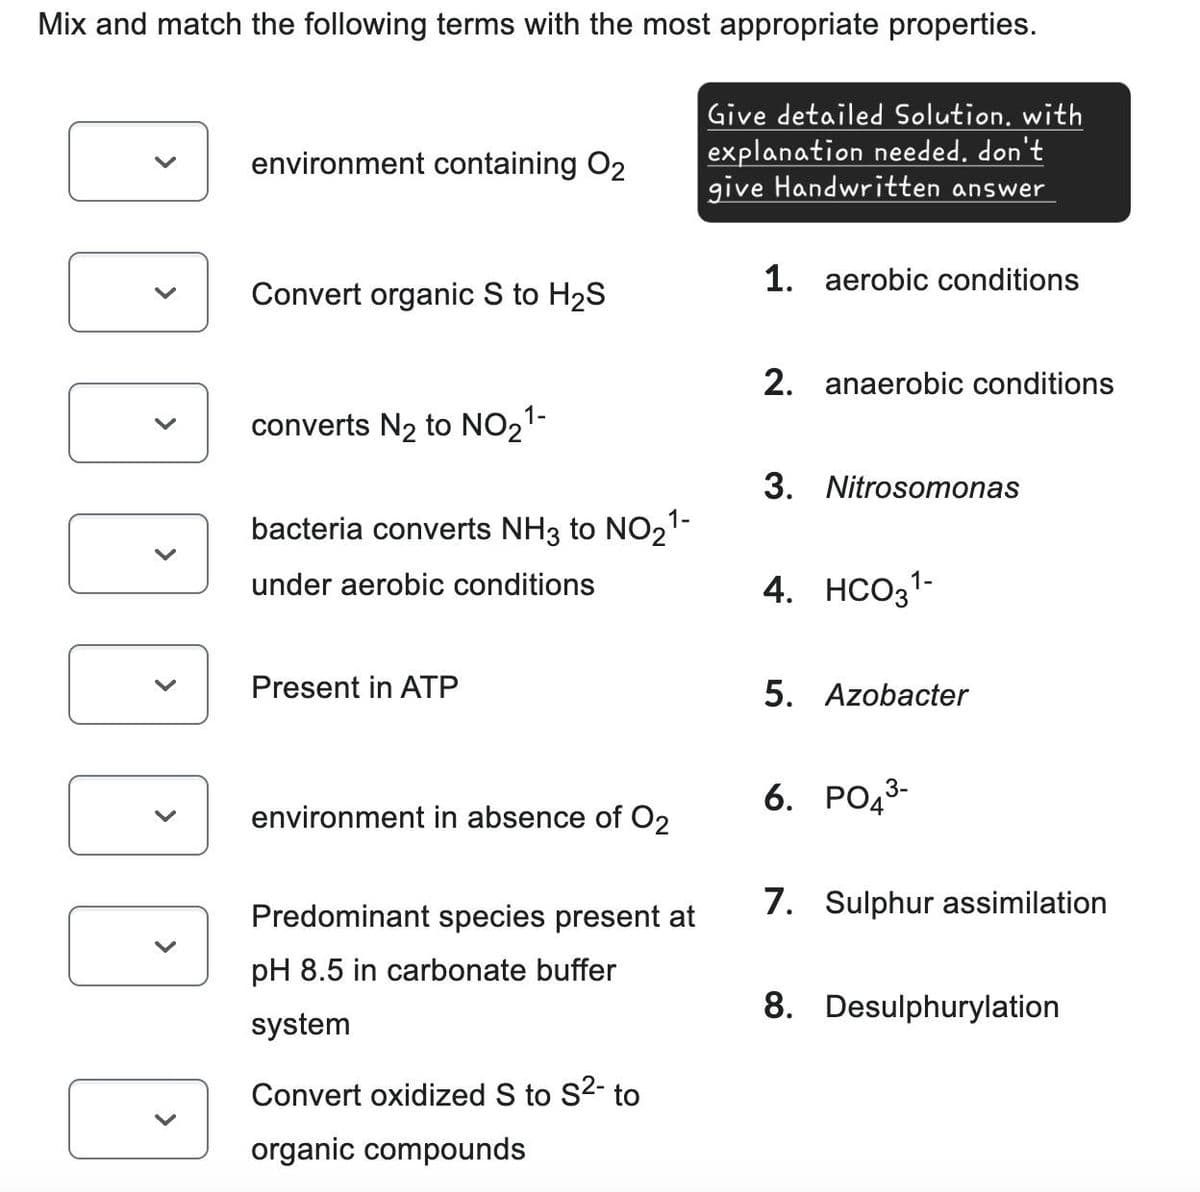 Mix and match the following terms with the most appropriate properties.
environment containing O2
Give detailed Solution, with
explanation needed. don't
give Handwritten answer
Convert organic S to H2S
1. aerobic conditions
2. anaerobic conditions
converts N2 to NO21-
bacteria converts NH 3 to NO21-
under aerobic conditions
Present in ATP
3. Nitrosomonas
4. HCO31-
5. Azobacter
environment in absence of O2
Predominant species present at
pH 8.5 in carbonate buffer
system
Convert oxidized S to S²- to
organic compounds
6. PO 3-
7. Sulphur assimilation
8. Desulphurylation